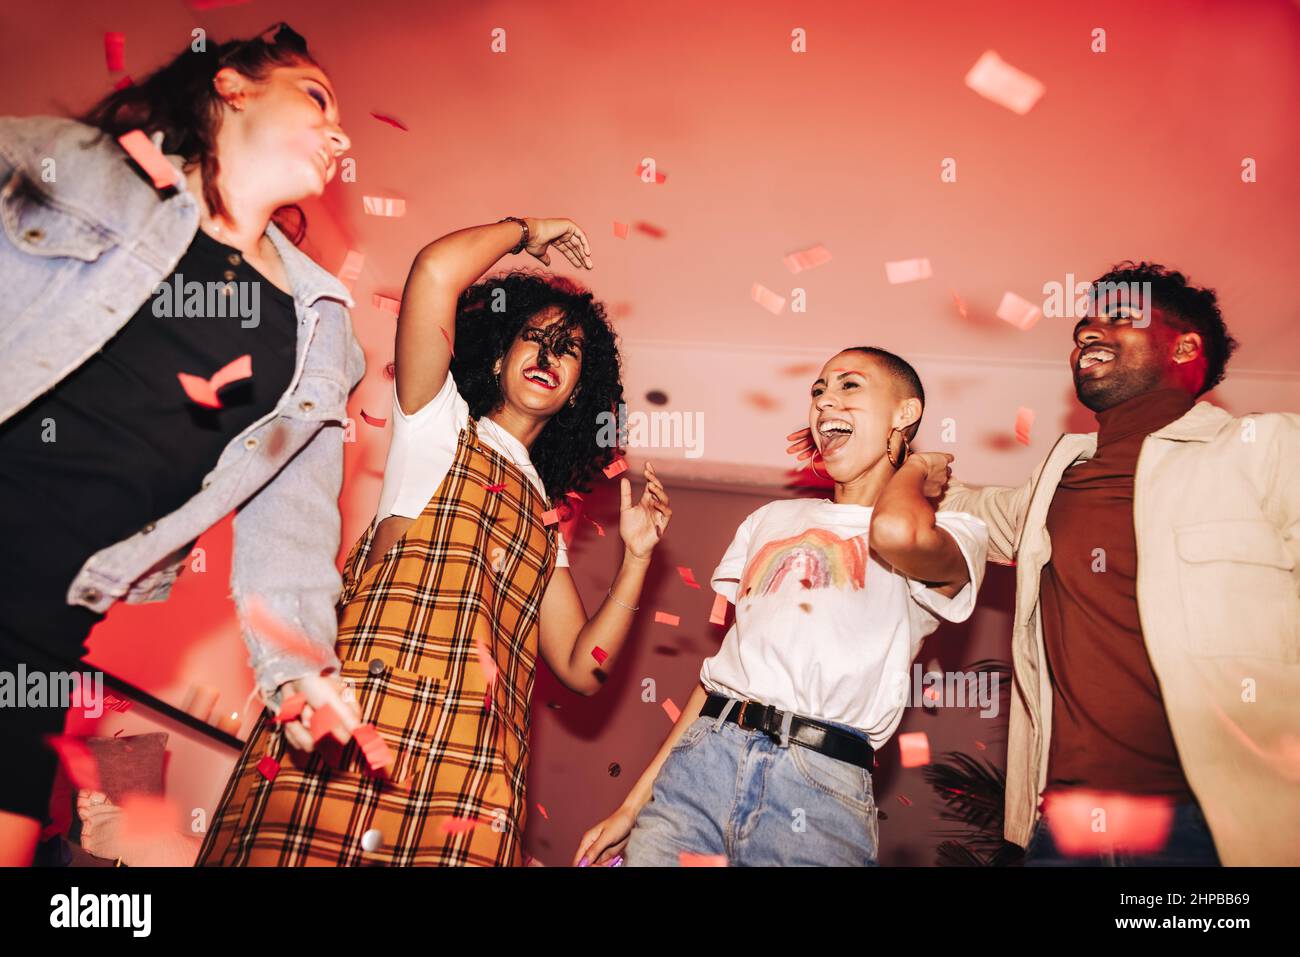 Enjoying the life of the party. Group of happy friends dancing to their favourite song under falling confetti. Multicultural friends having fun at a v Stock Photo